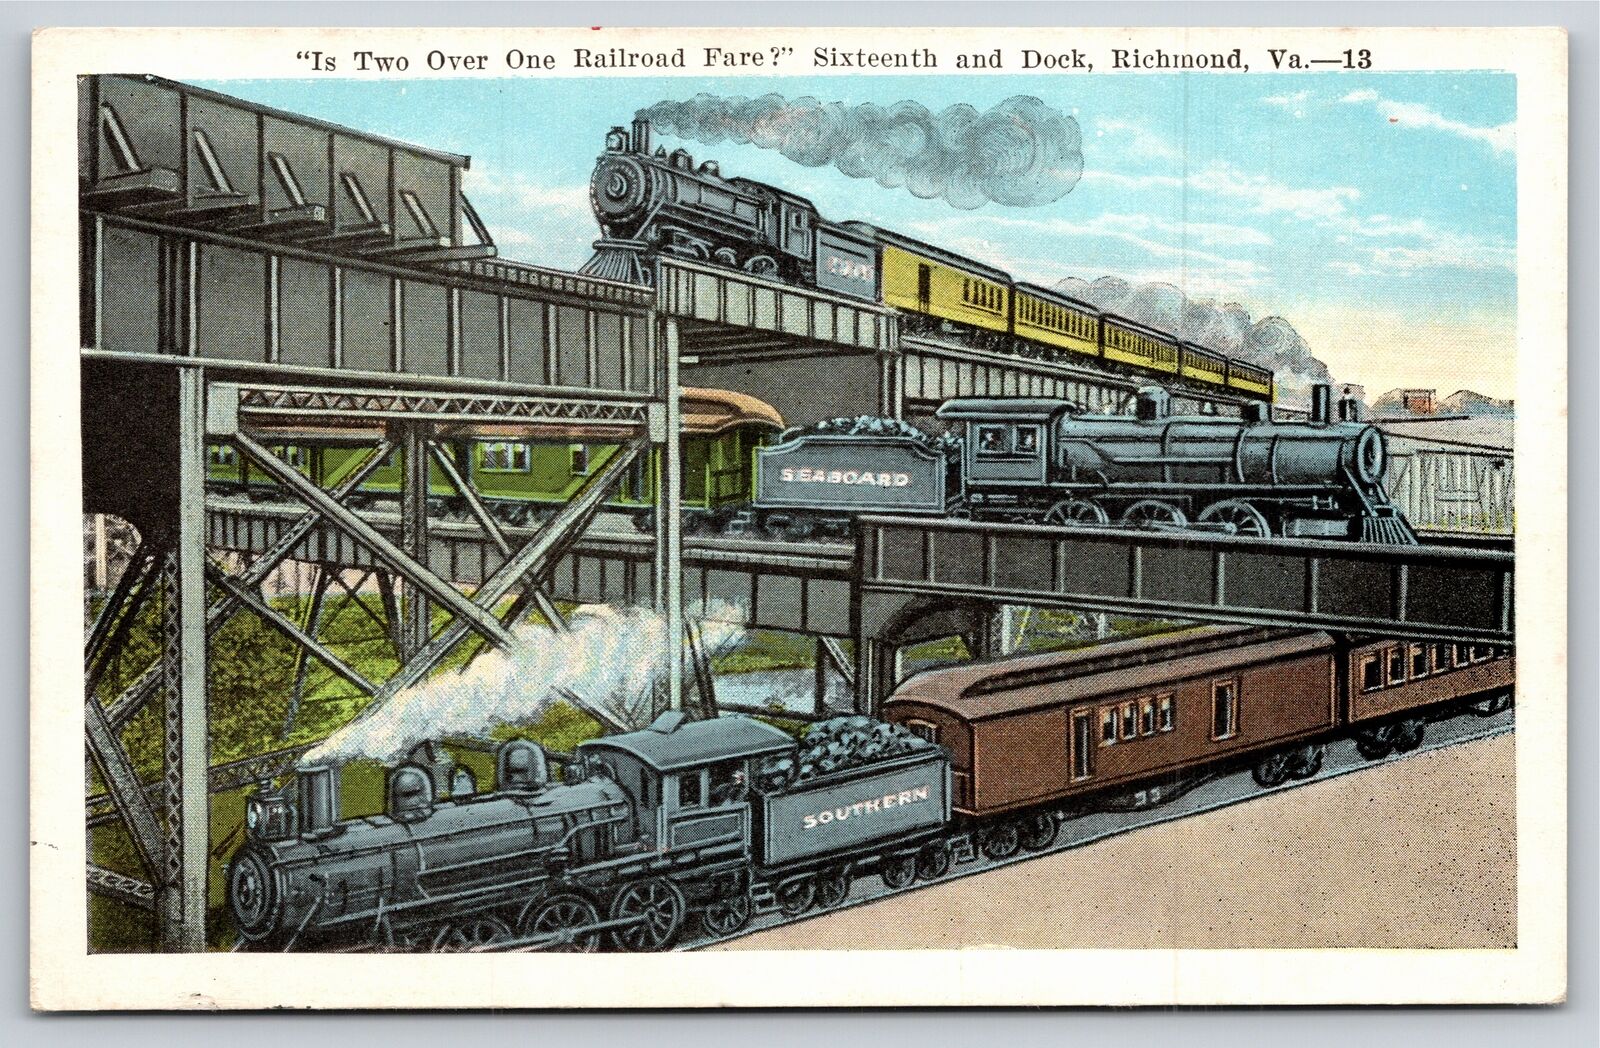 Richmond Virginia~Is 2 Over One RR Fare 16th & Dock~Vintage Postcard